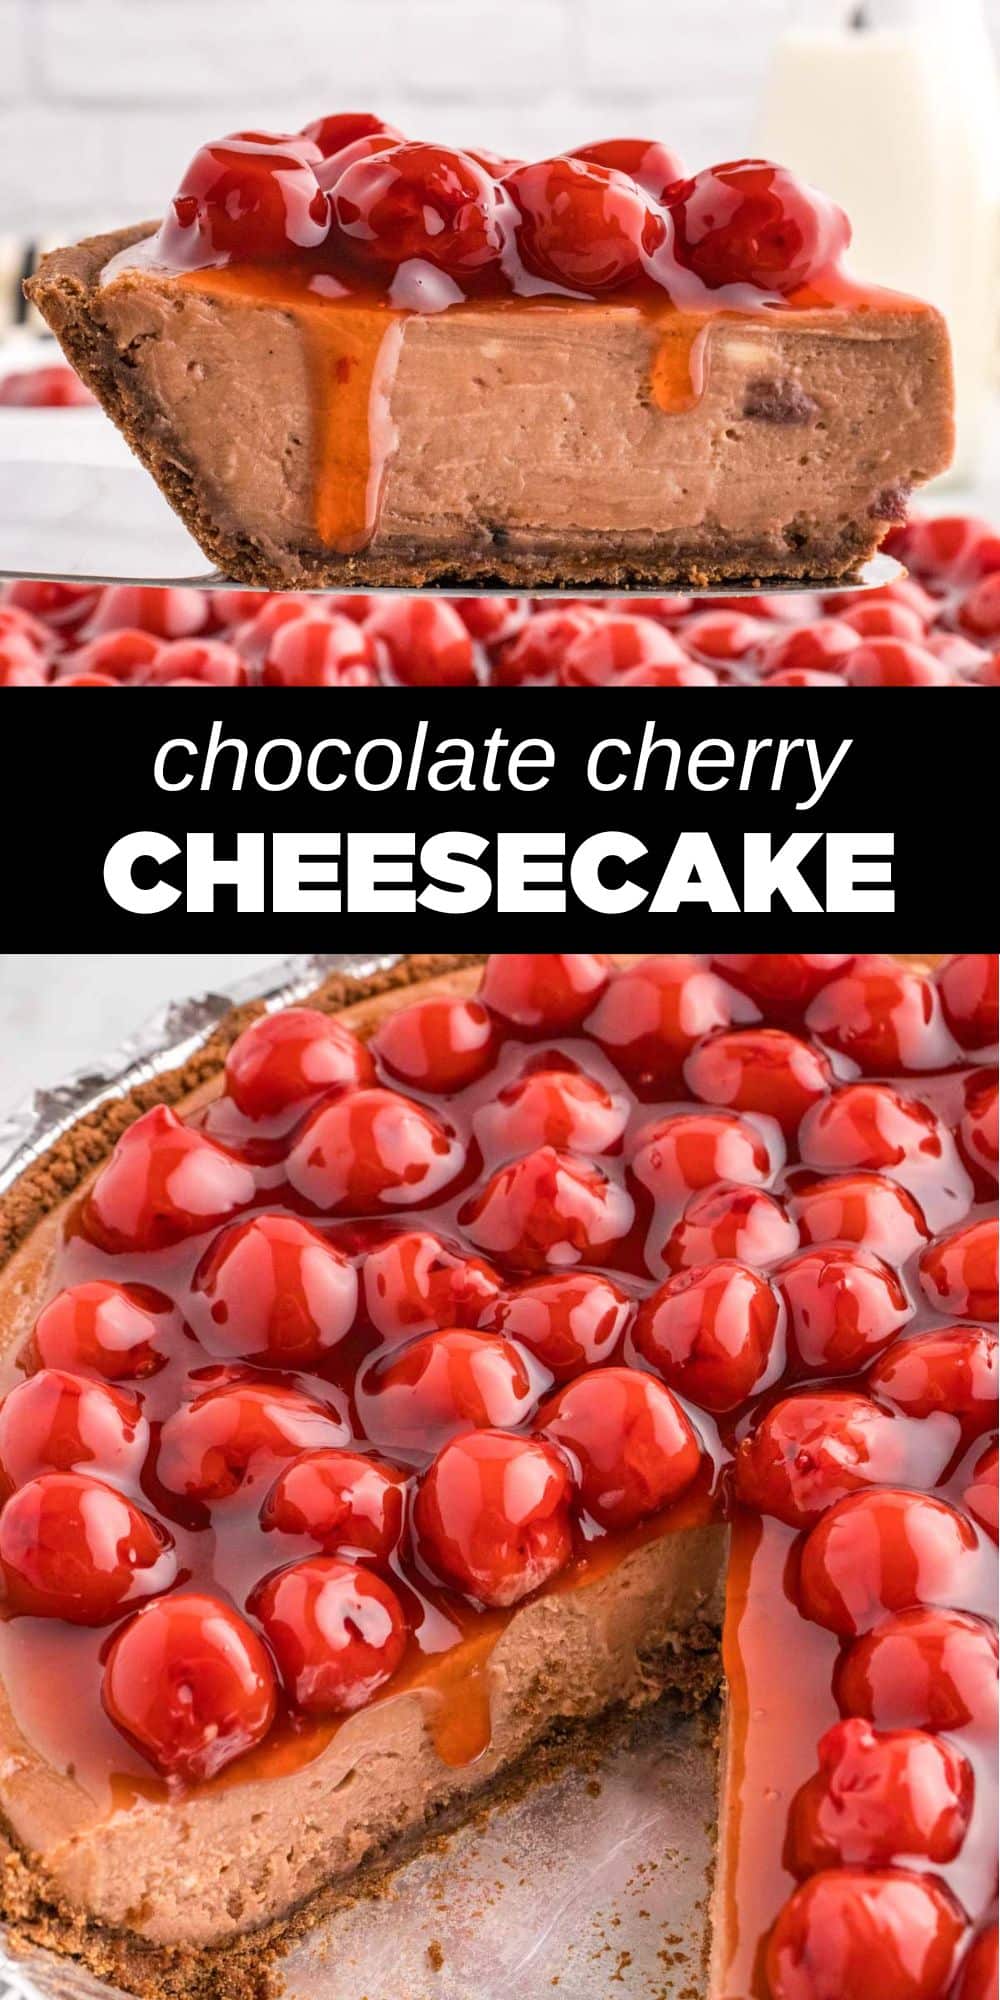 This creamy Chocolate Cherry Cheesecake pie is for all the cherry lovers out there. Rich, velvety chocolate cheesecake with a vibrant, tangy burst of cherries creates an irresistible dessert for any occasion.